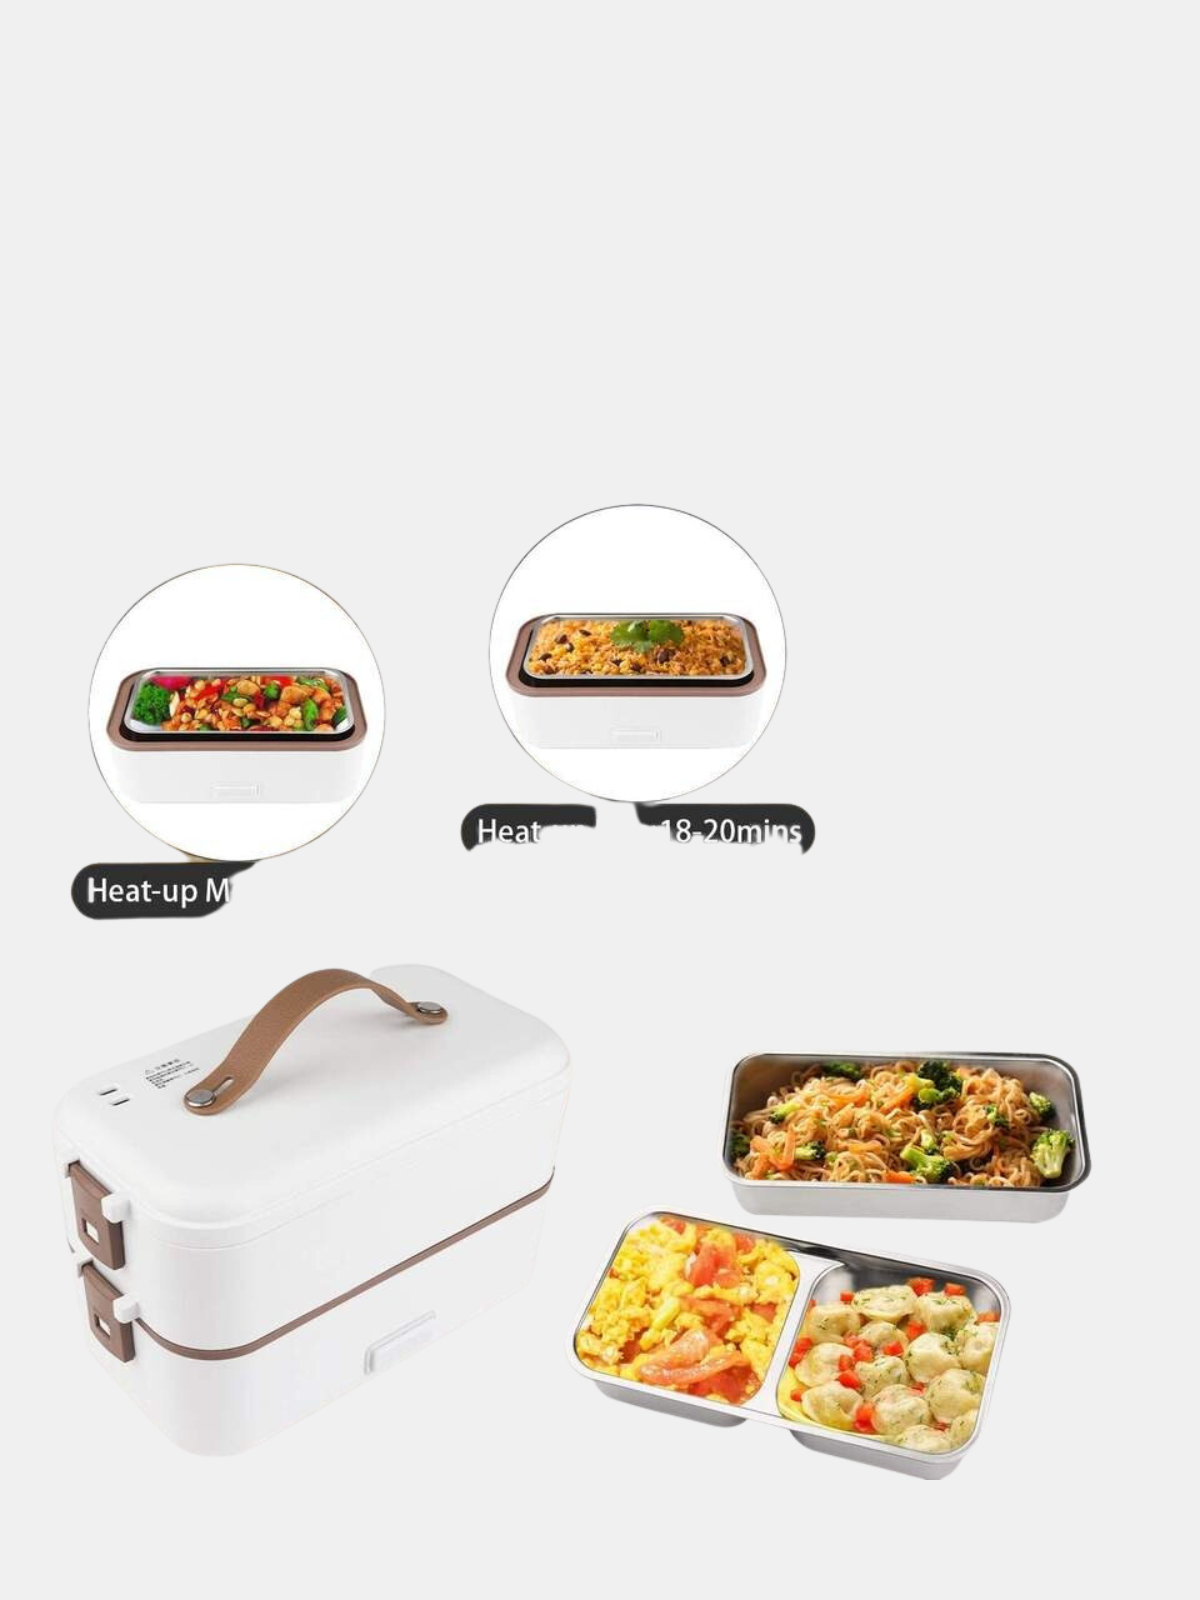 https://images.verishop.com/vigor-heated-lunch-box-800-ml-self-cooking-electric-lunch-box-portable-food-warmer-for-on-the-go-2-layers/M00749565871006-593333436?auto=format&cs=strip&fit=max&w=1200